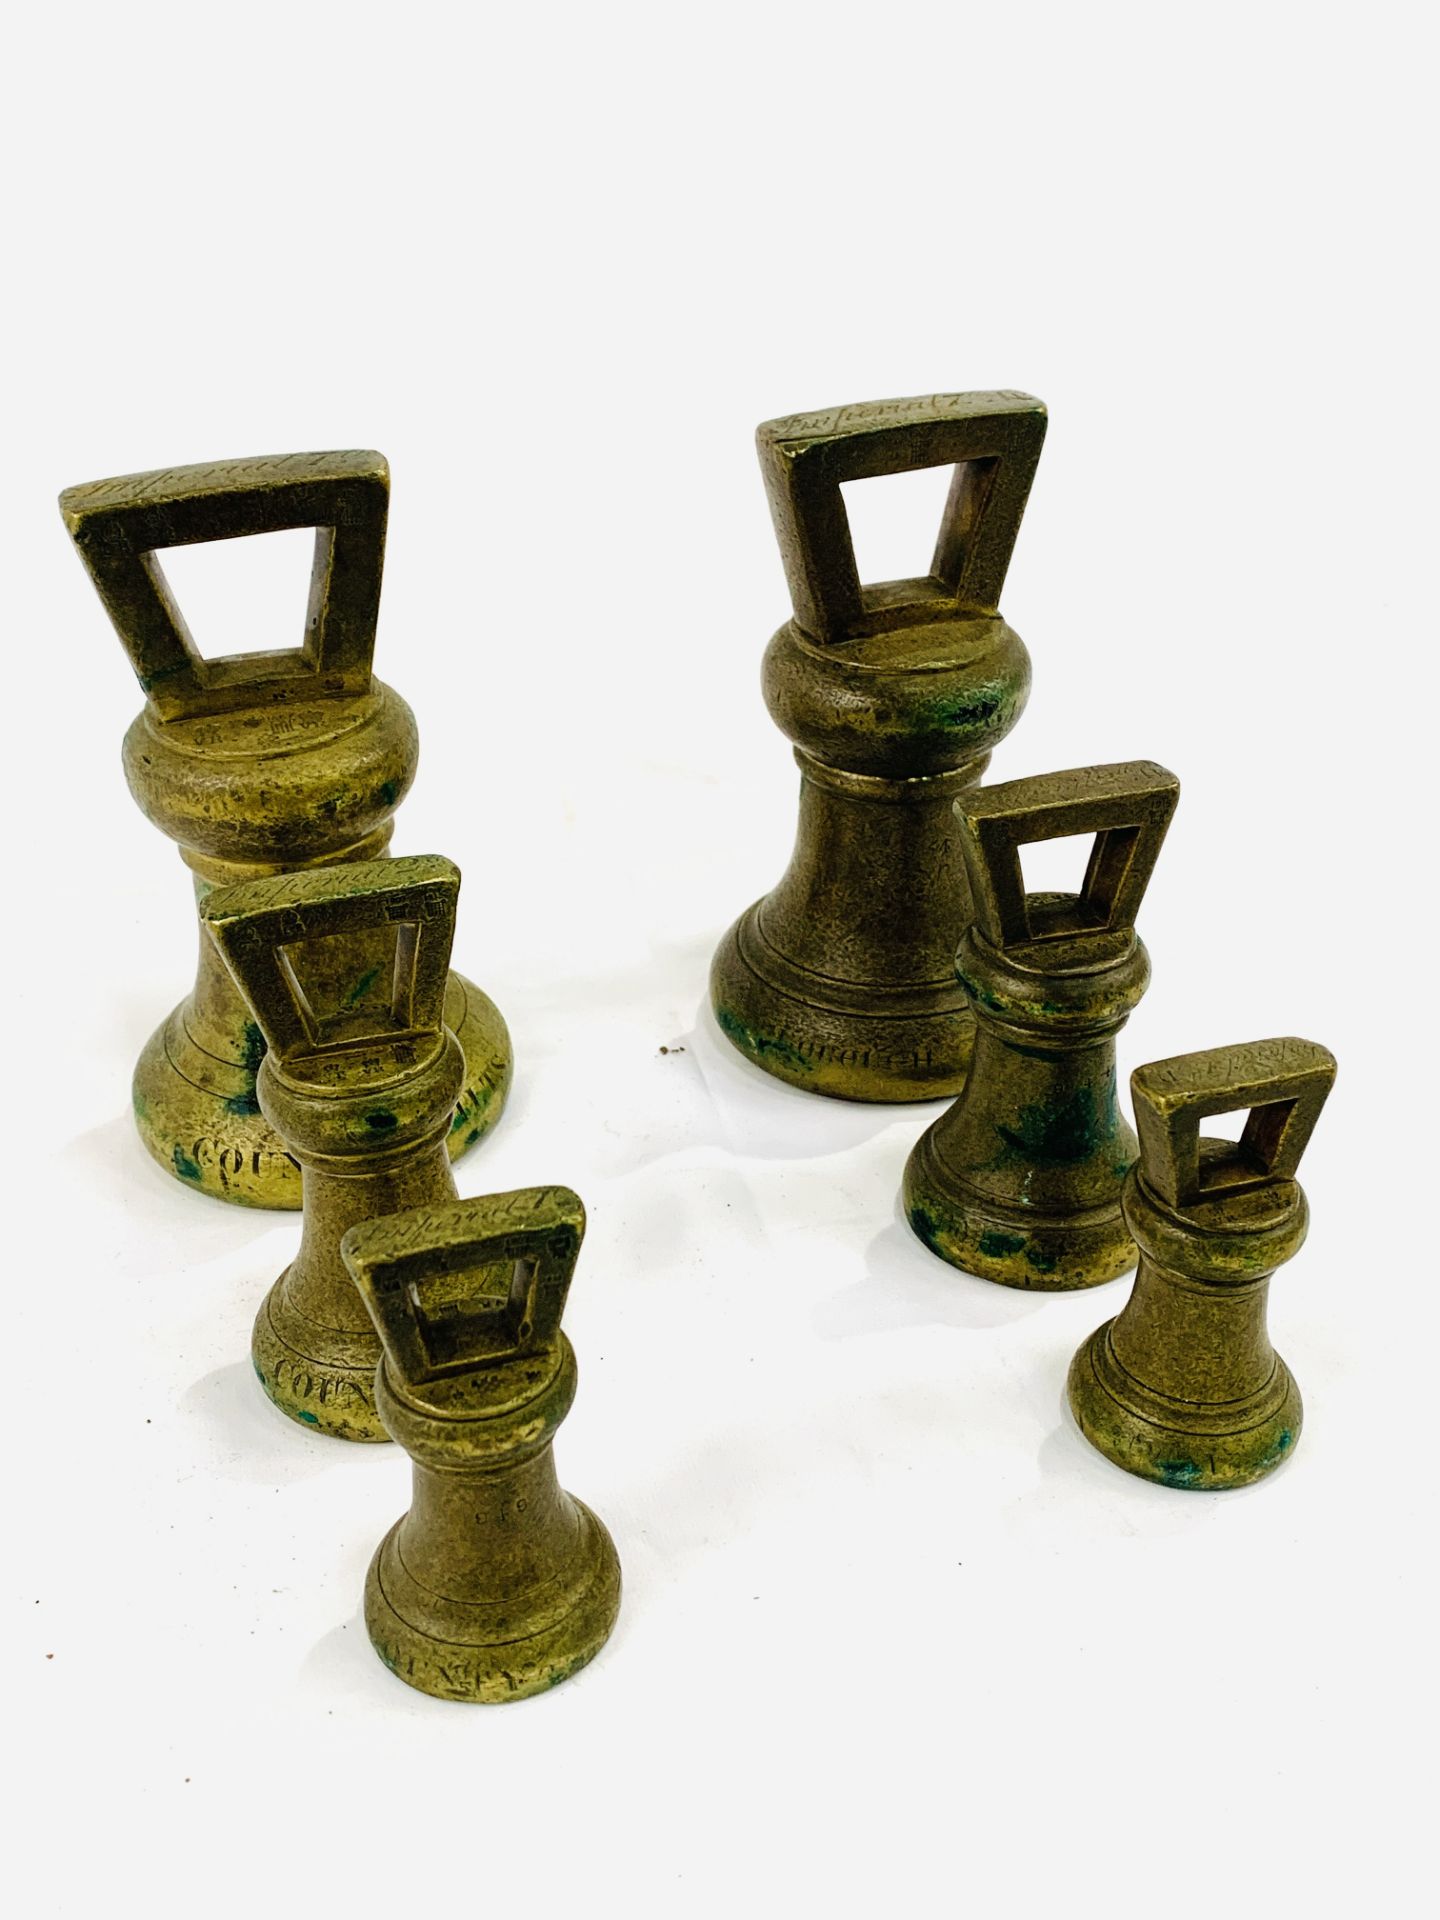 Two sets of brass Imperial standard bell weights